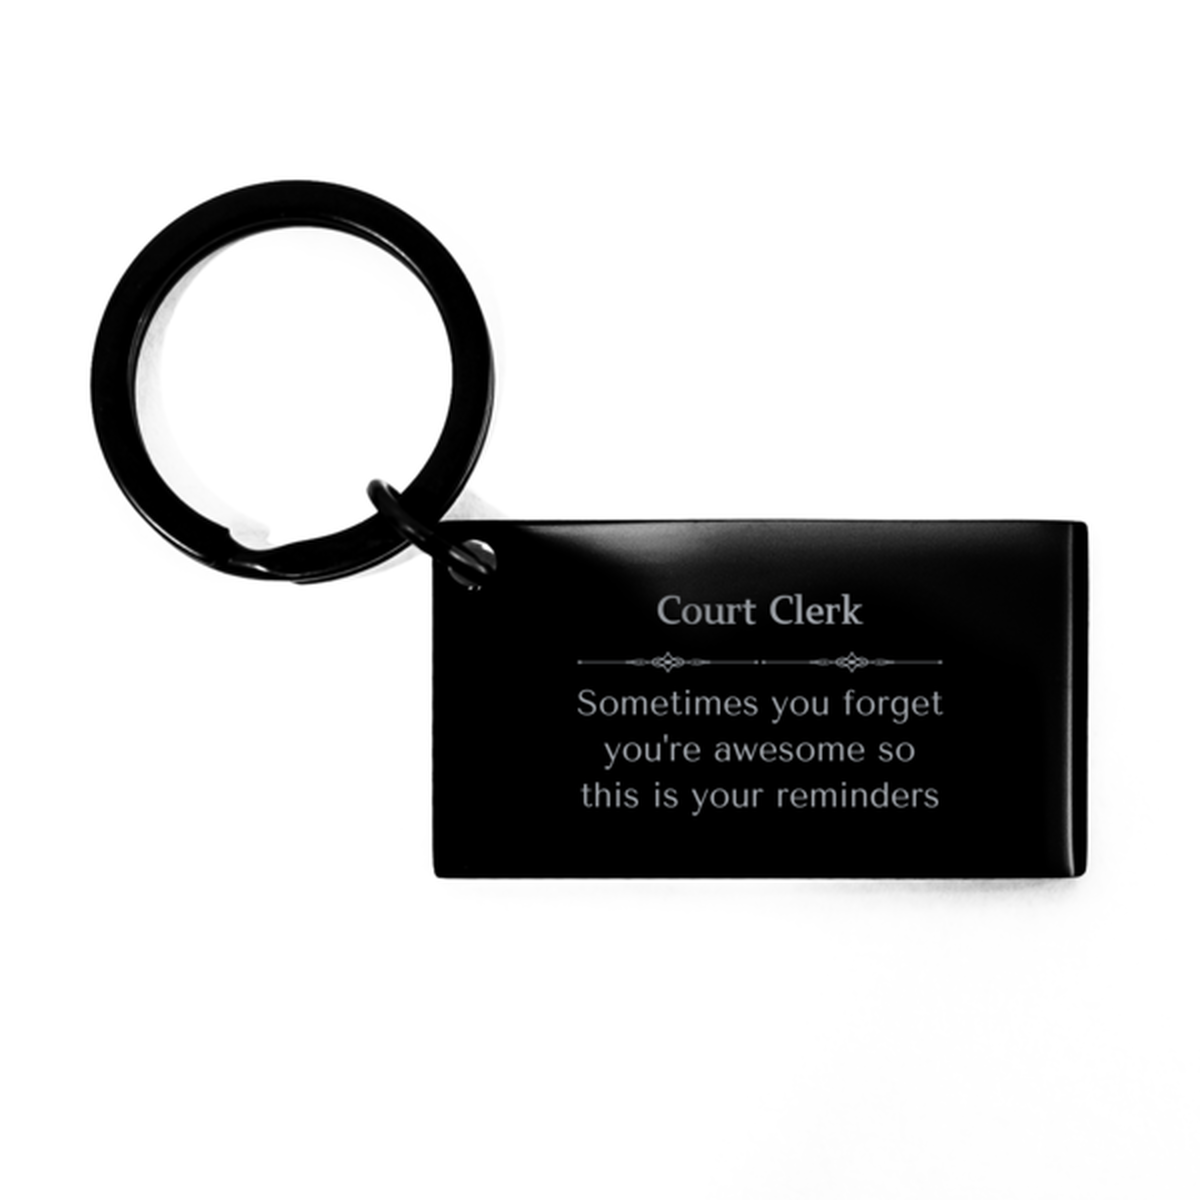 Sentimental Court Clerk Keychain, Financial Advisor Sometimes you forget you're awesome so this is your reminders, Graduation Christmas Birthday Gifts for Court Clerk, Men, Women, Coworkers